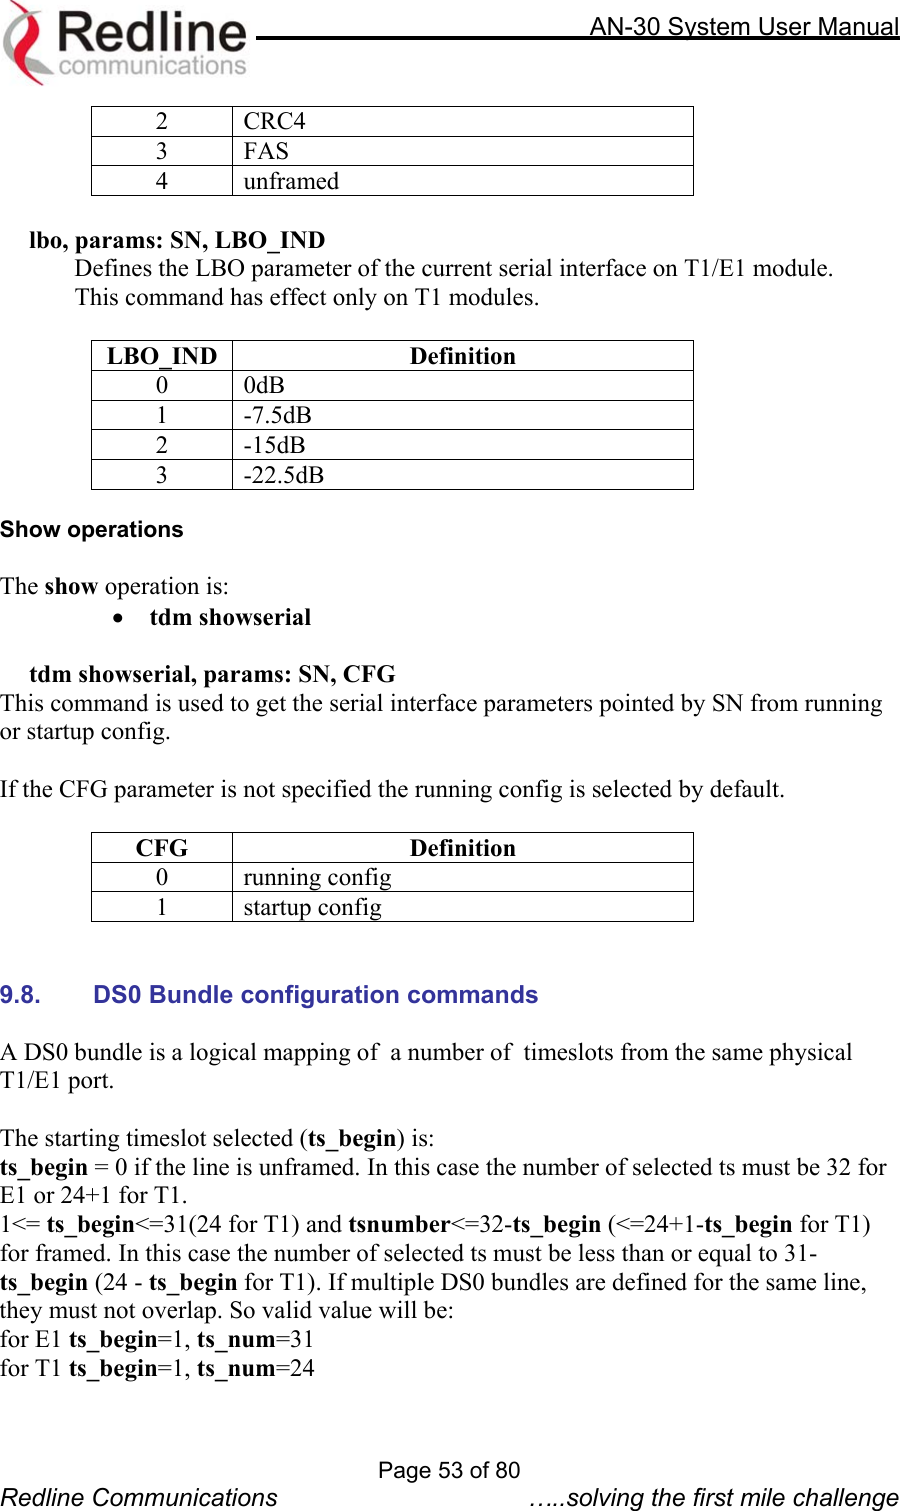     AN-30 System User Manual  2 CRC4 3 FAS 4 unframed  lbo, params: SN, LBO_IND   Defines the LBO parameter of the current serial interface on T1/E1 module.   This command has effect only on T1 modules.  LBO_IND Definition 0 0dB 1 -7.5dB 2 -15dB 3 -22.5dB  Show operations  The show operation is: •  tdm showserial    tdm showserial, params: SN, CFG This command is used to get the serial interface parameters pointed by SN from running or startup config.  If the CFG parameter is not specified the running config is selected by default.  CFG Definition 0 running config 1 startup config   9.8.  DS0 Bundle configuration commands  A DS0 bundle is a logical mapping of  a number of  timeslots from the same physical T1/E1 port.   The starting timeslot selected (ts_begin) is: ts_begin = 0 if the line is unframed. In this case the number of selected ts must be 32 for E1 or 24+1 for T1. 1&lt;= ts_begin&lt;=31(24 for T1) and tsnumber&lt;=32-ts_begin (&lt;=24+1-ts_begin for T1) for framed. In this case the number of selected ts must be less than or equal to 31- ts_begin (24 - ts_begin for T1). If multiple DS0 bundles are defined for the same line, they must not overlap. So valid value will be:  for E1 ts_begin=1, ts_num=31 for T1 ts_begin=1, ts_num=24 Page 53 of 80 Redline Communications  …..solving the first mile challenge 